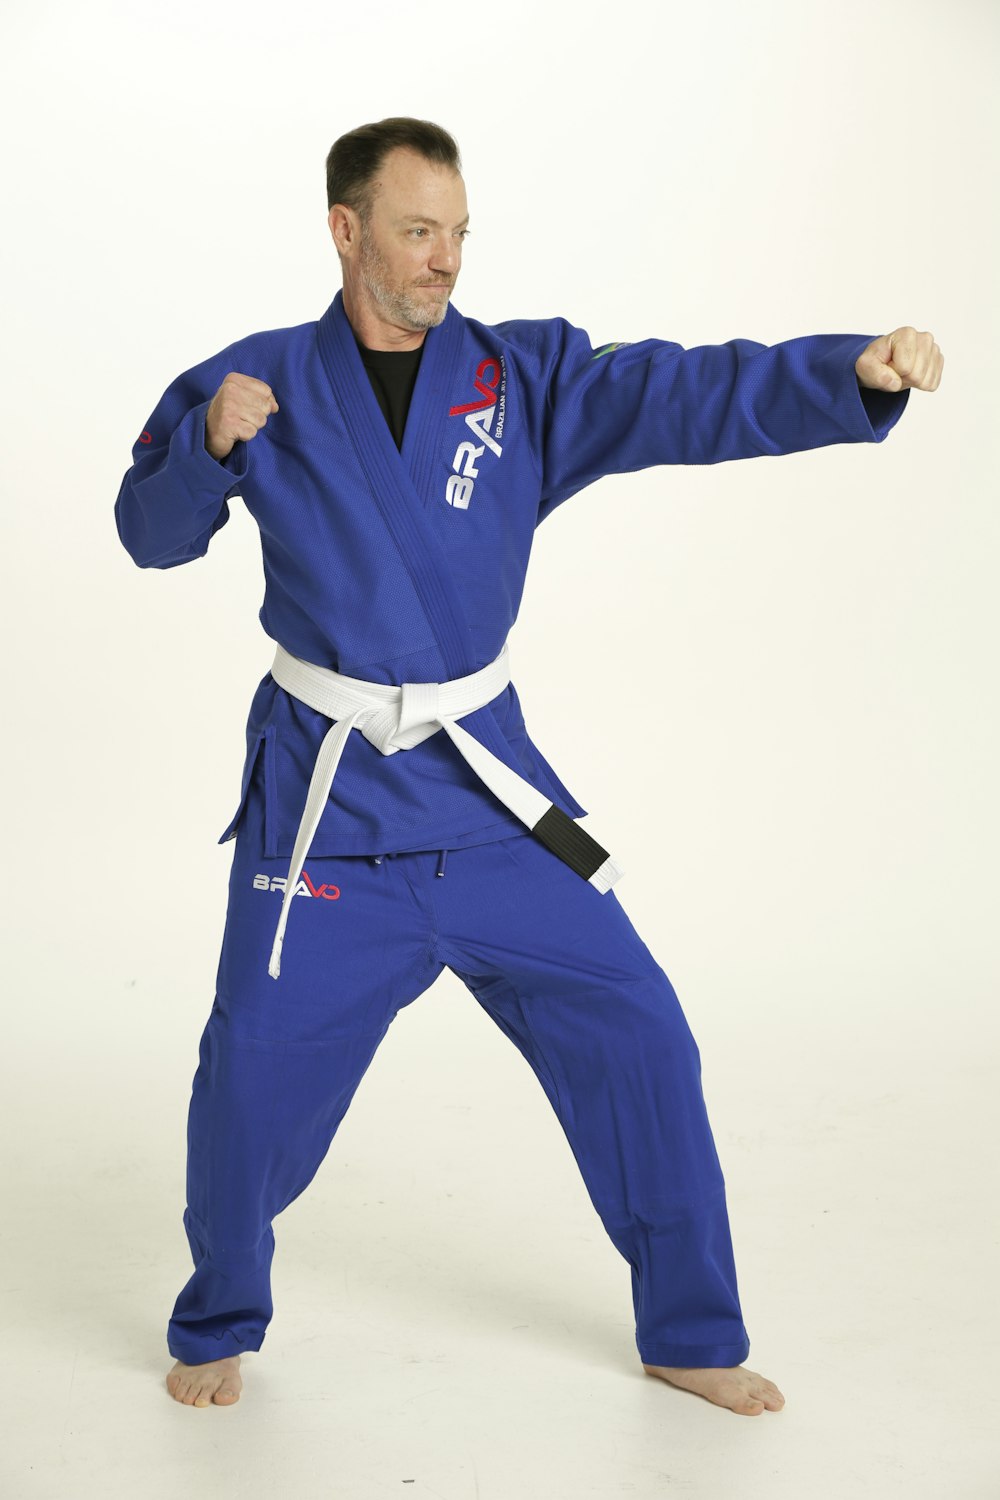 a man in a blue karate suit is posing for a picture